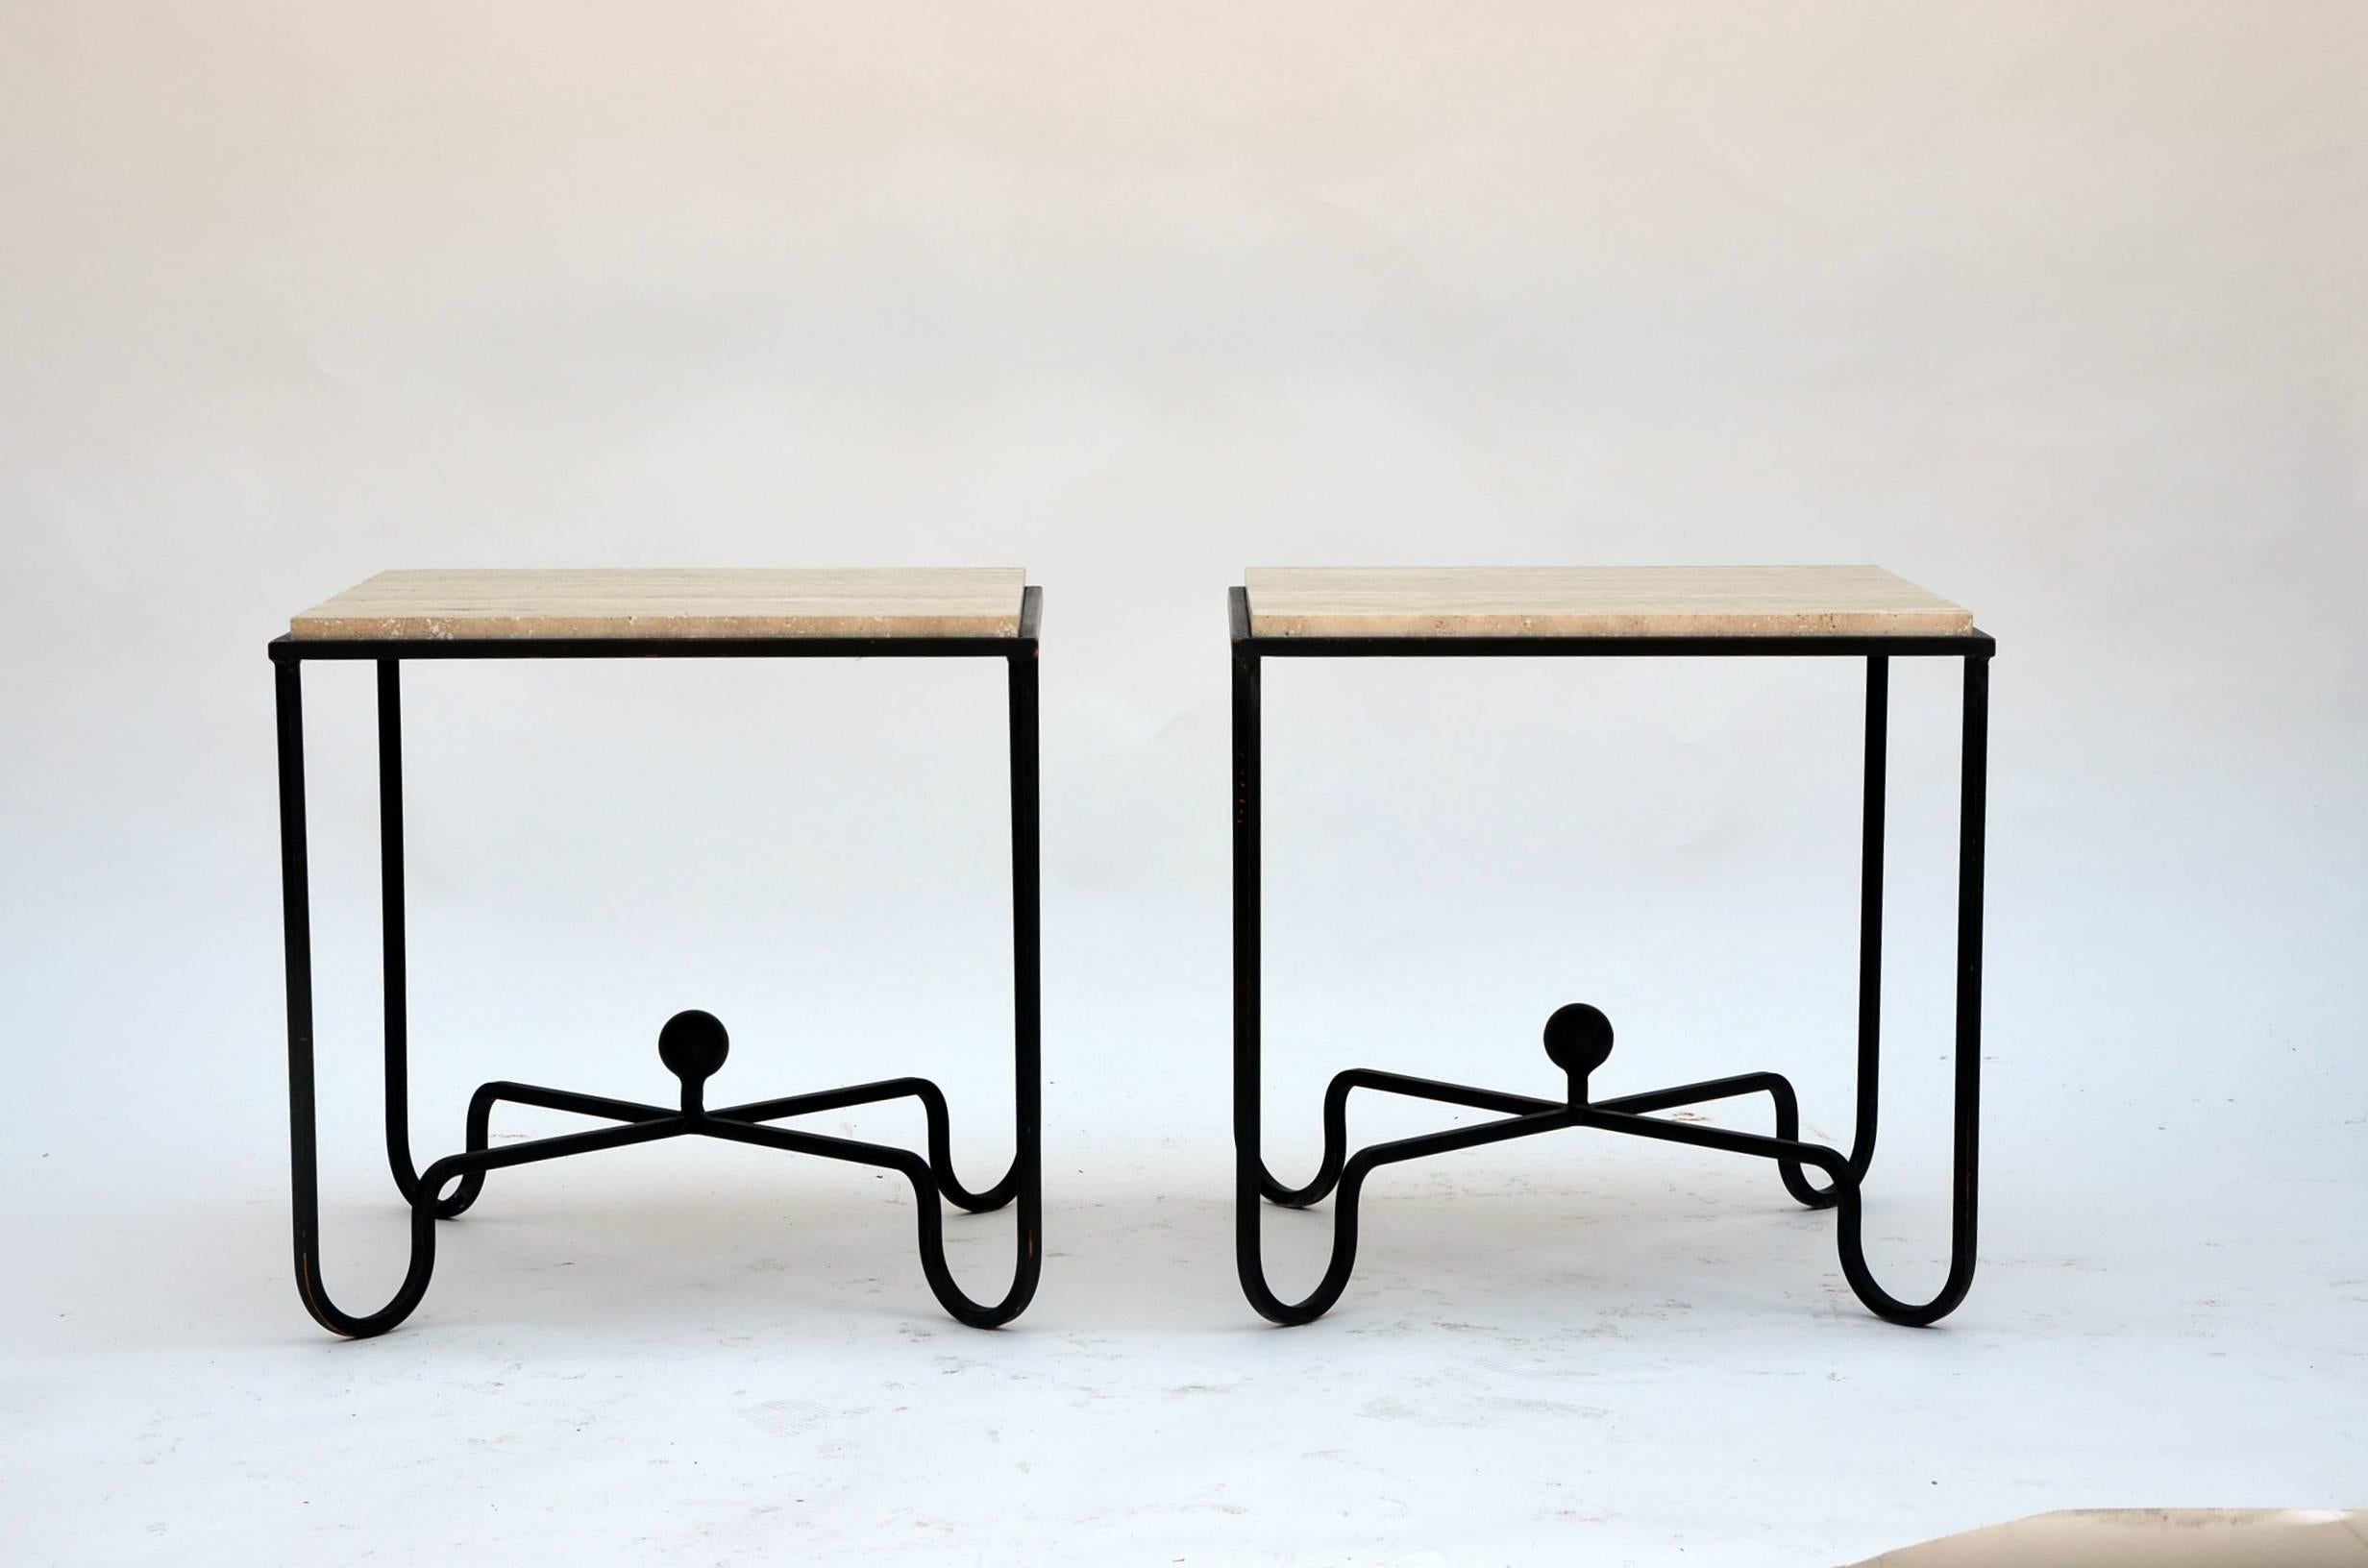 Modern Pair of Wrought Iron and Travertine Side Tables after Mathieu Matégot